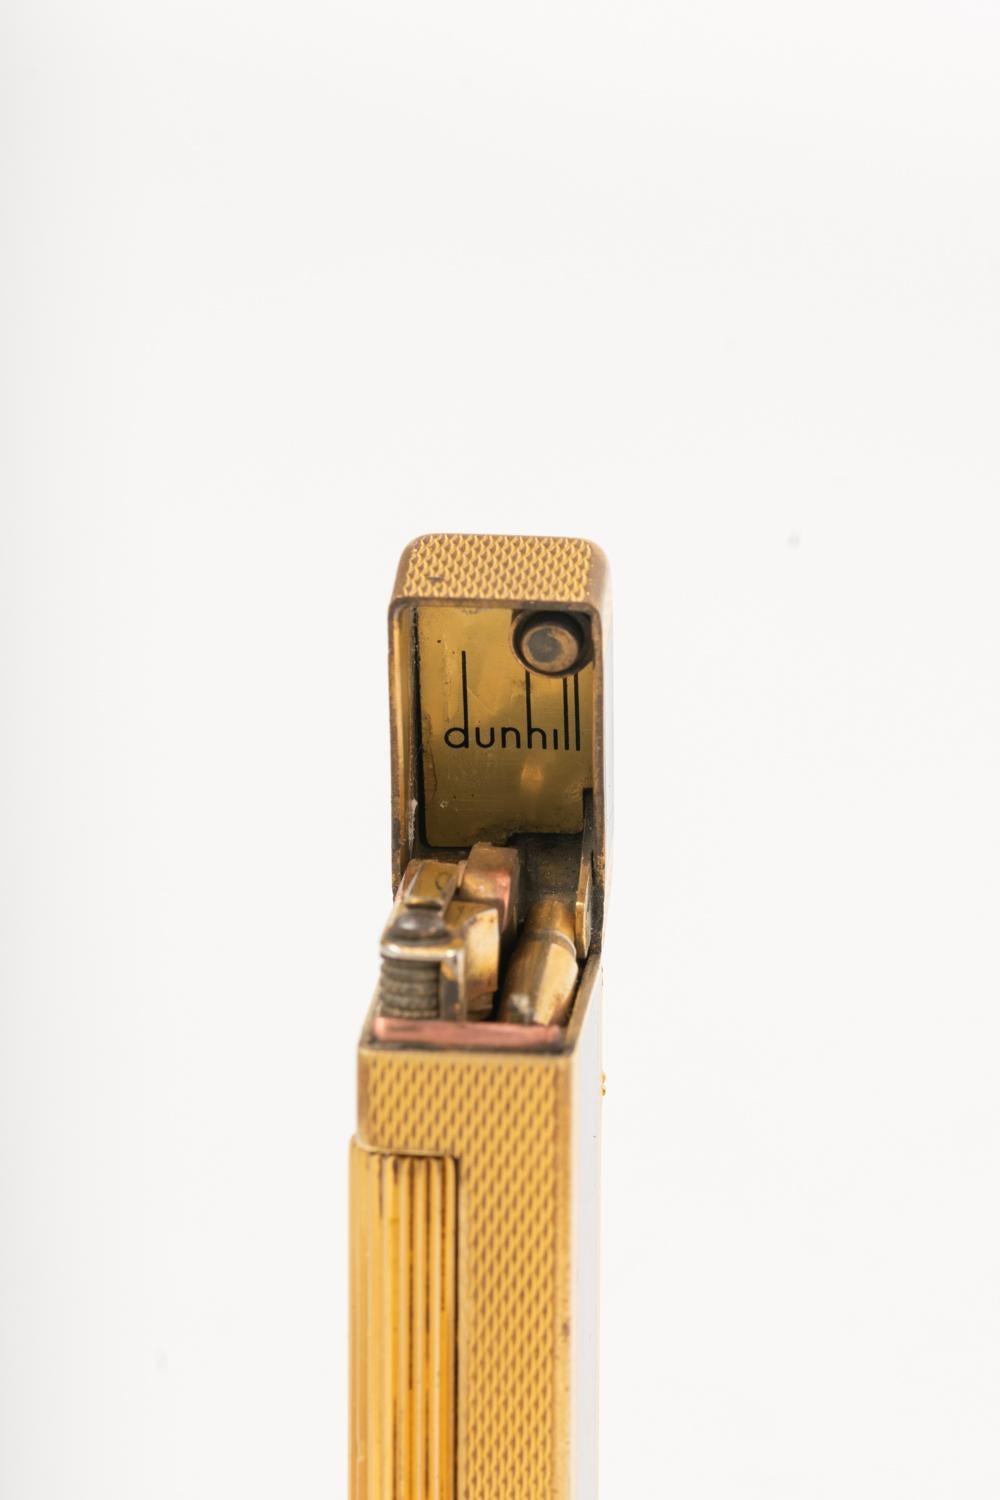 Dunhill Rollagas Lighter Gold Plated Blue Lacquer 1